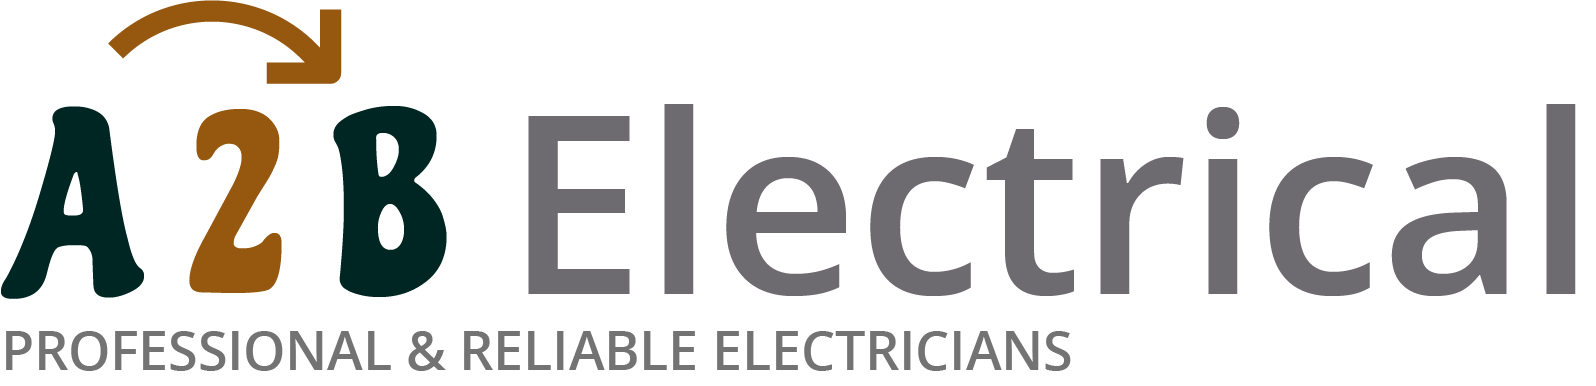 If you have electrical wiring problems in Maryport, we can provide an electrician to have a look for you. 